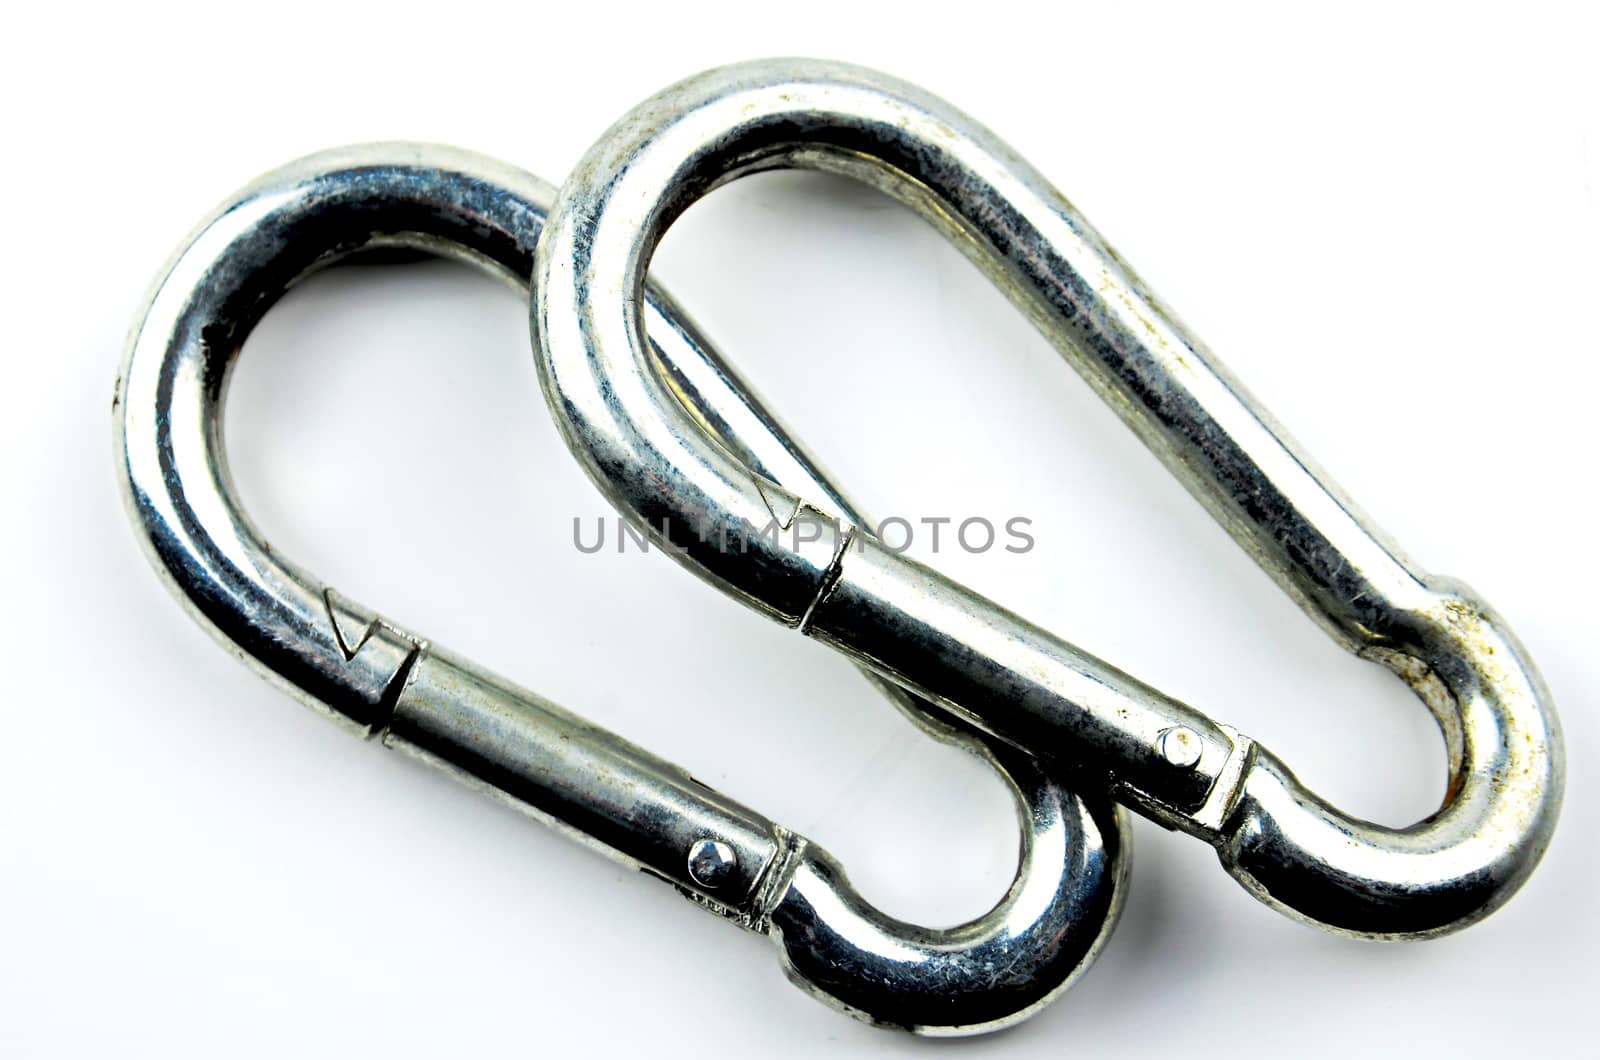 Two silver carabiner on white background
